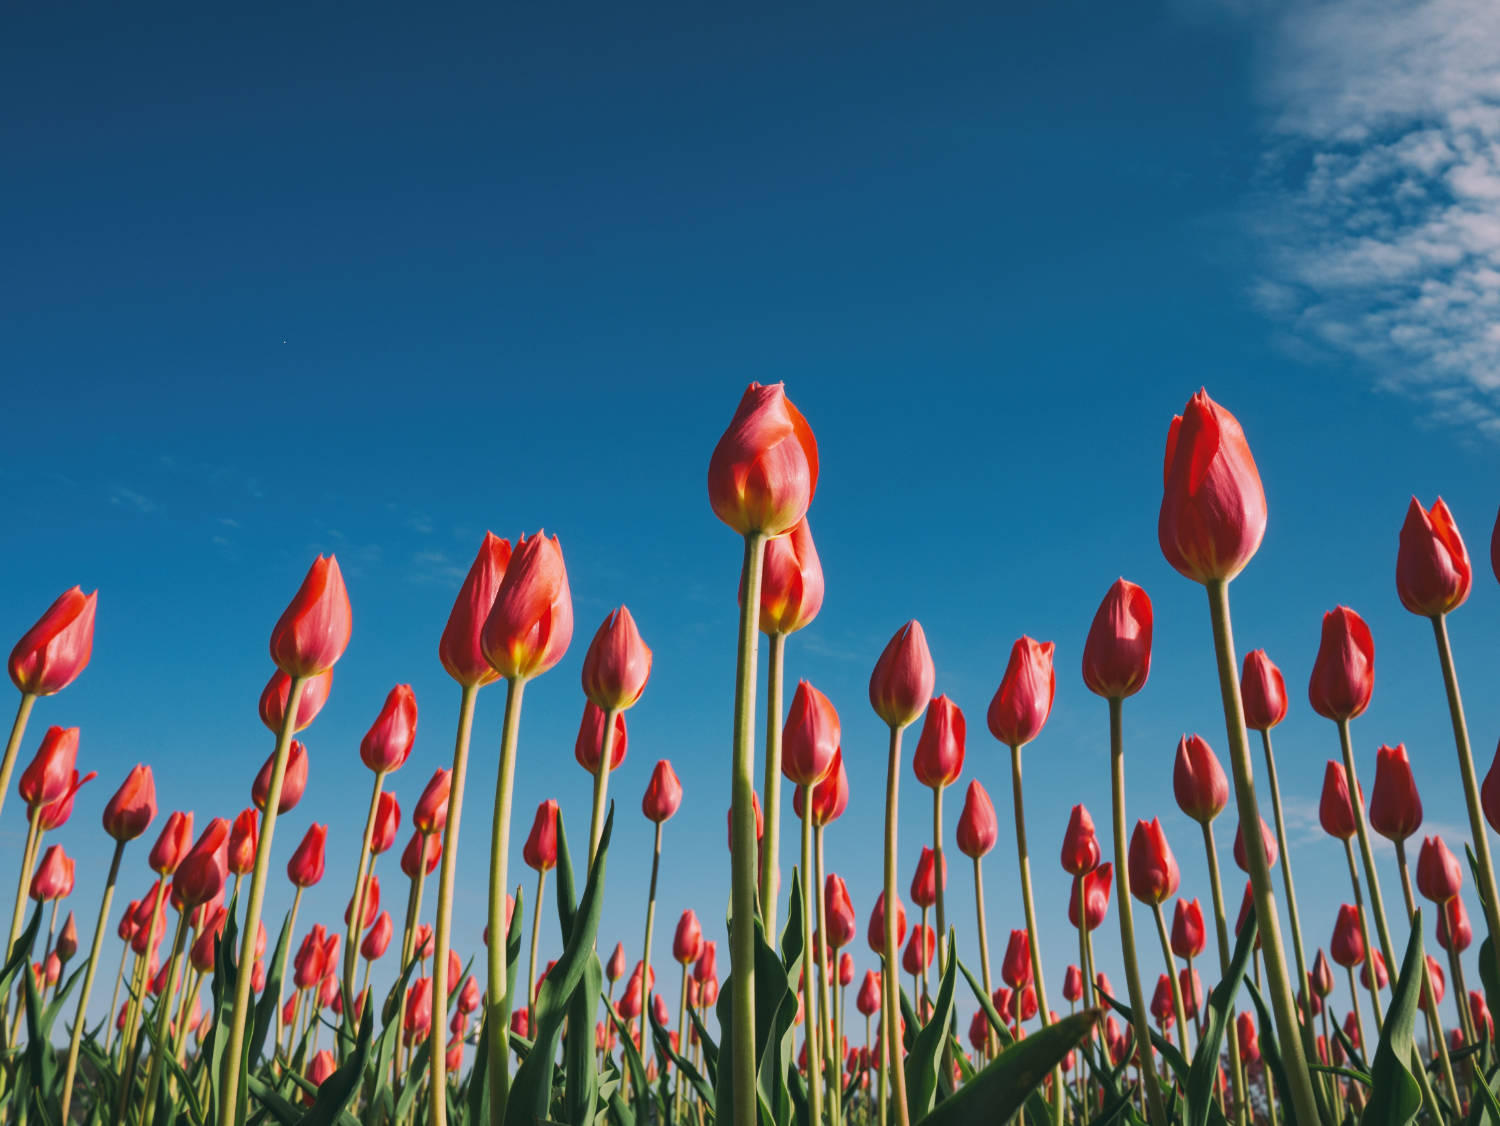 Red tulips under a blue sky